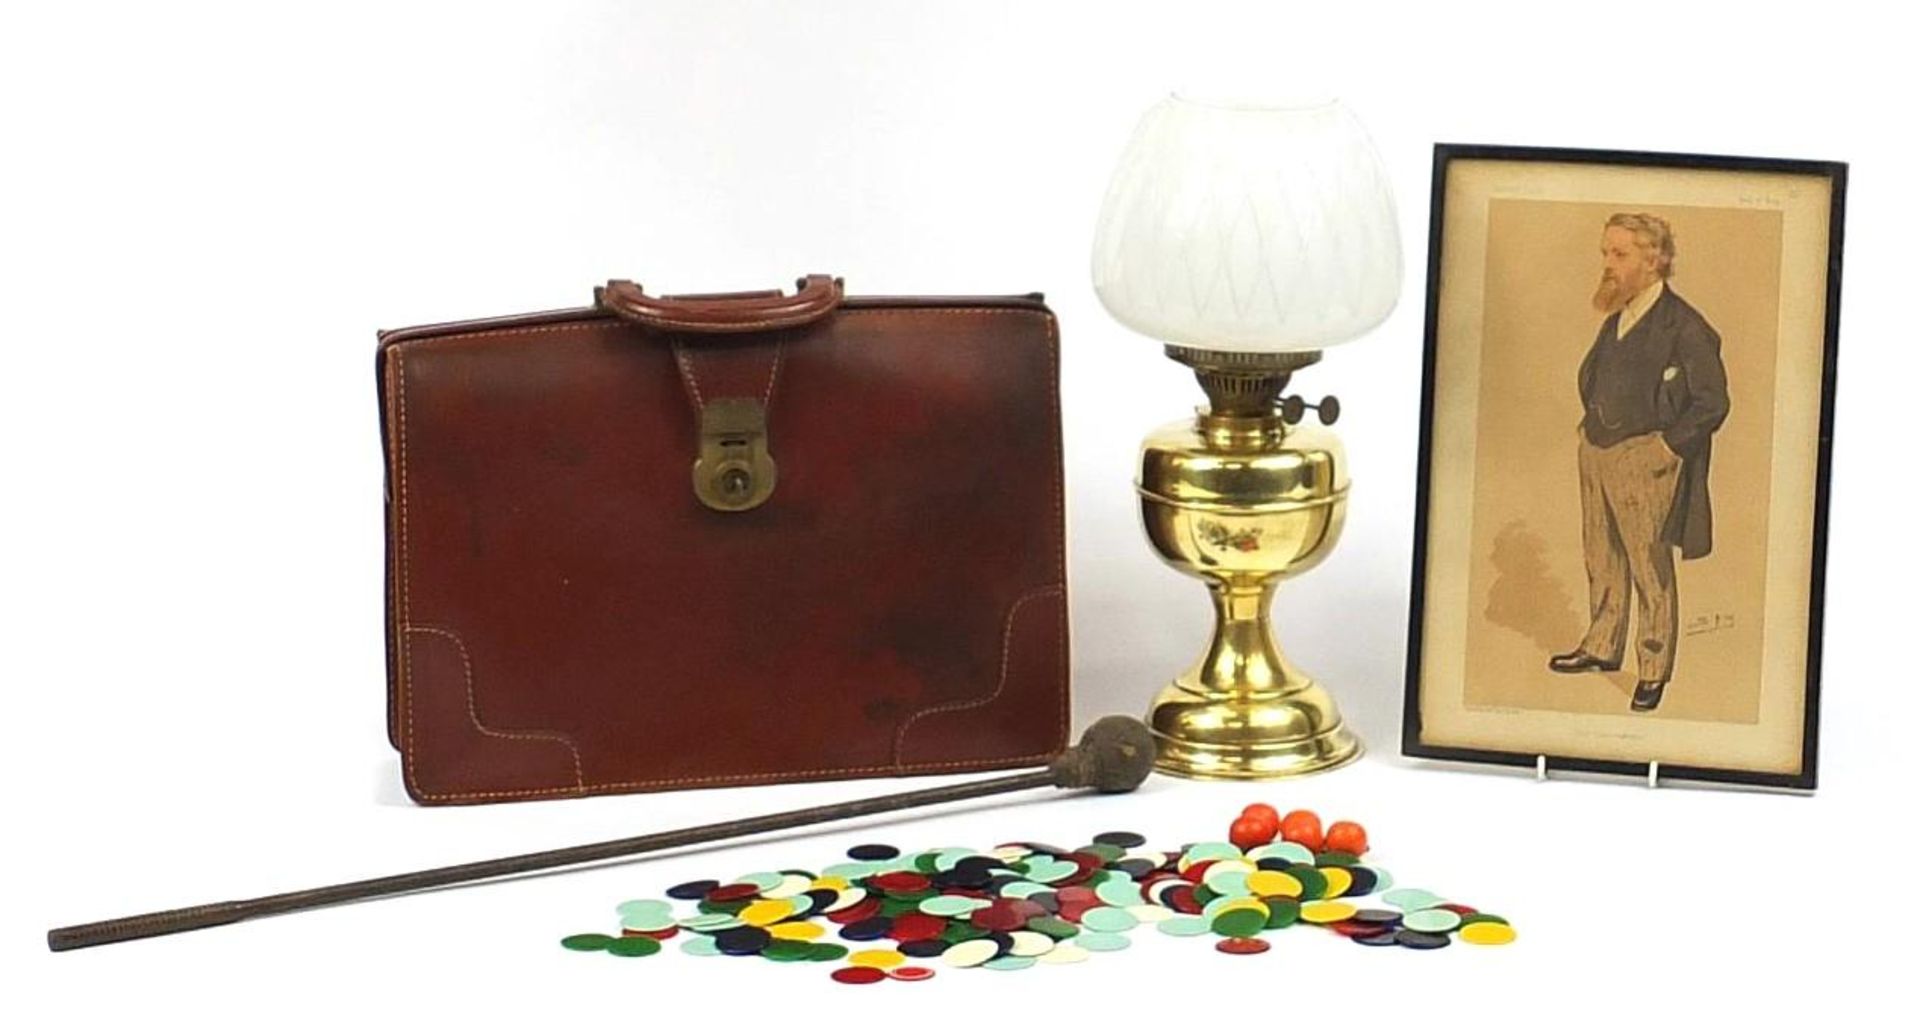 Sundry items including a oil lamp and gaming counters and a Spy print